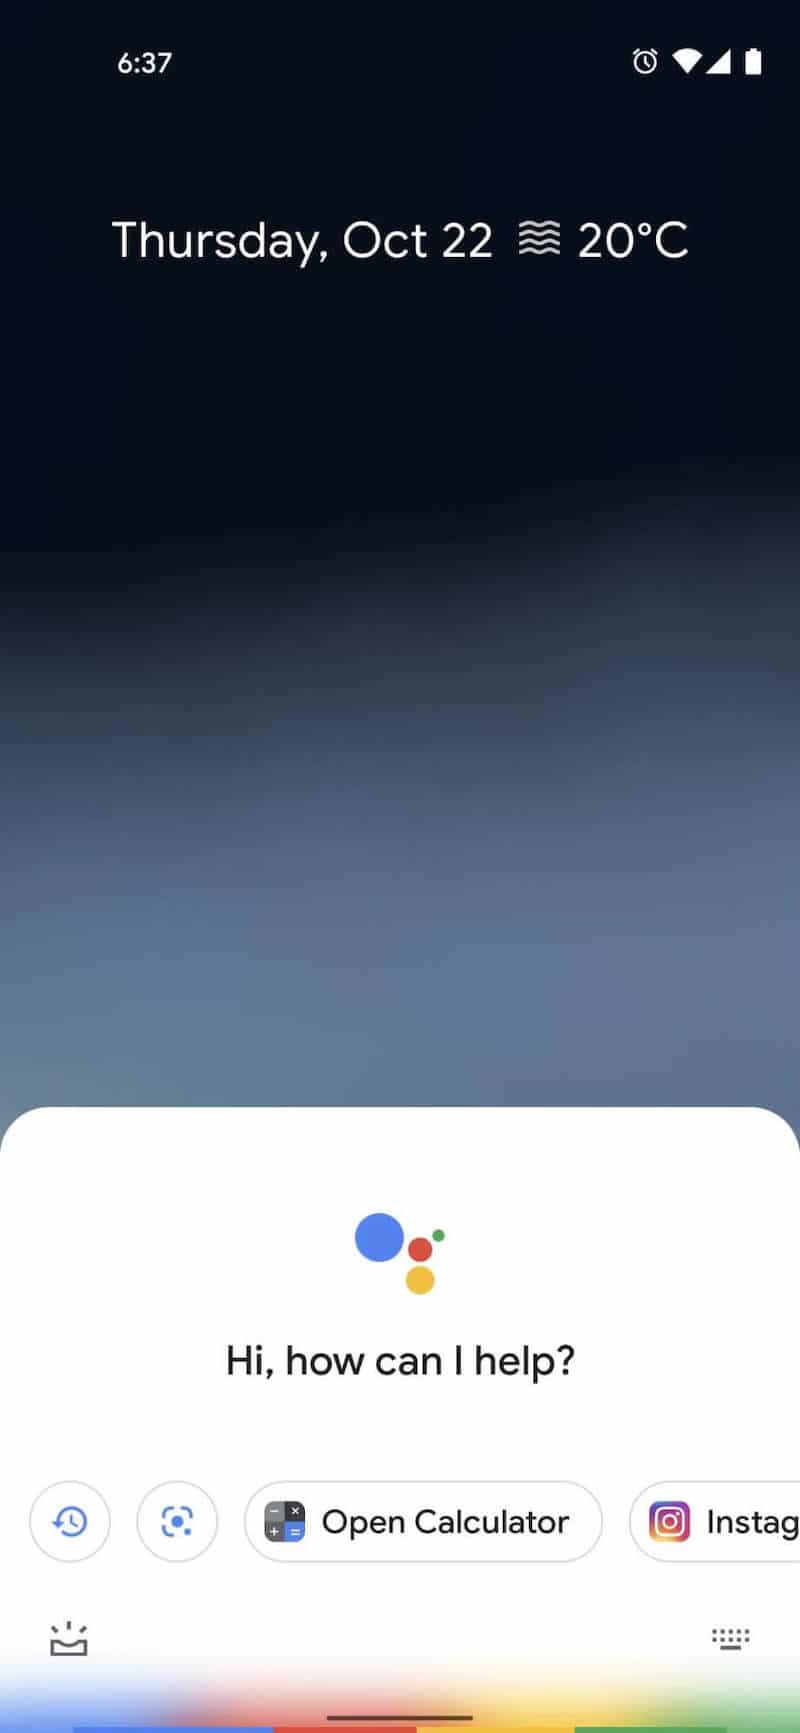 Sample Android App Home Screen With Google Assistant 